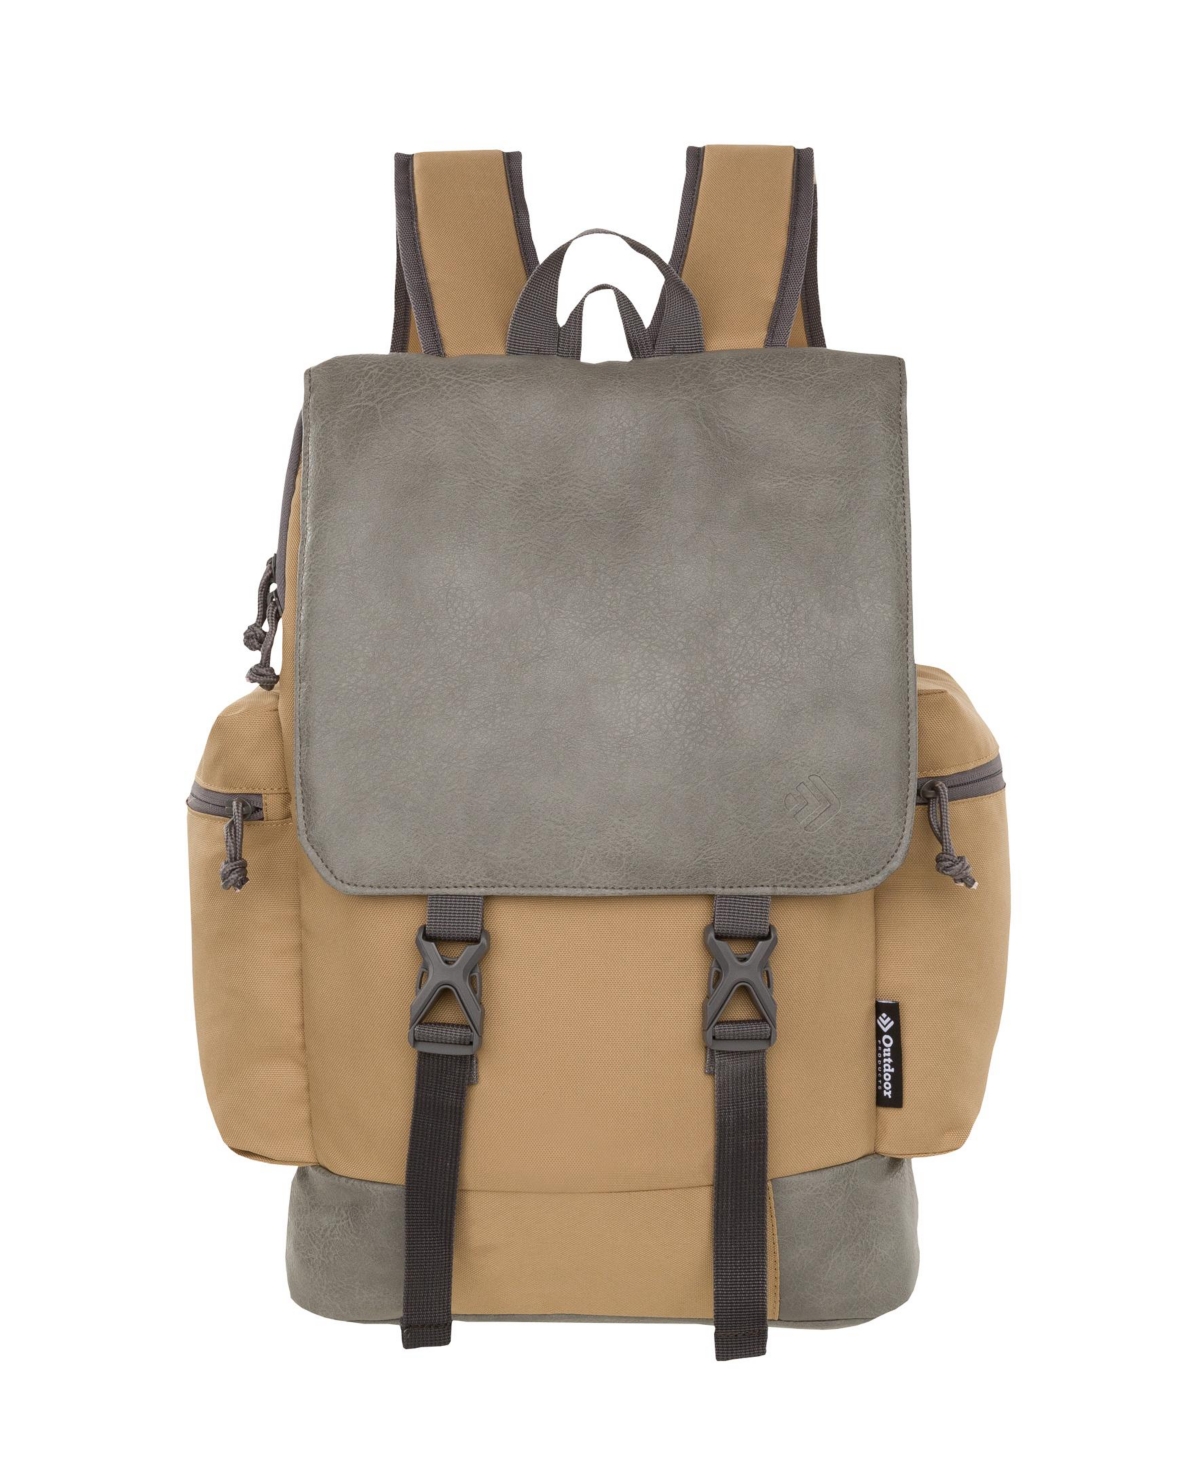 Wanderer Day Pack - Tan